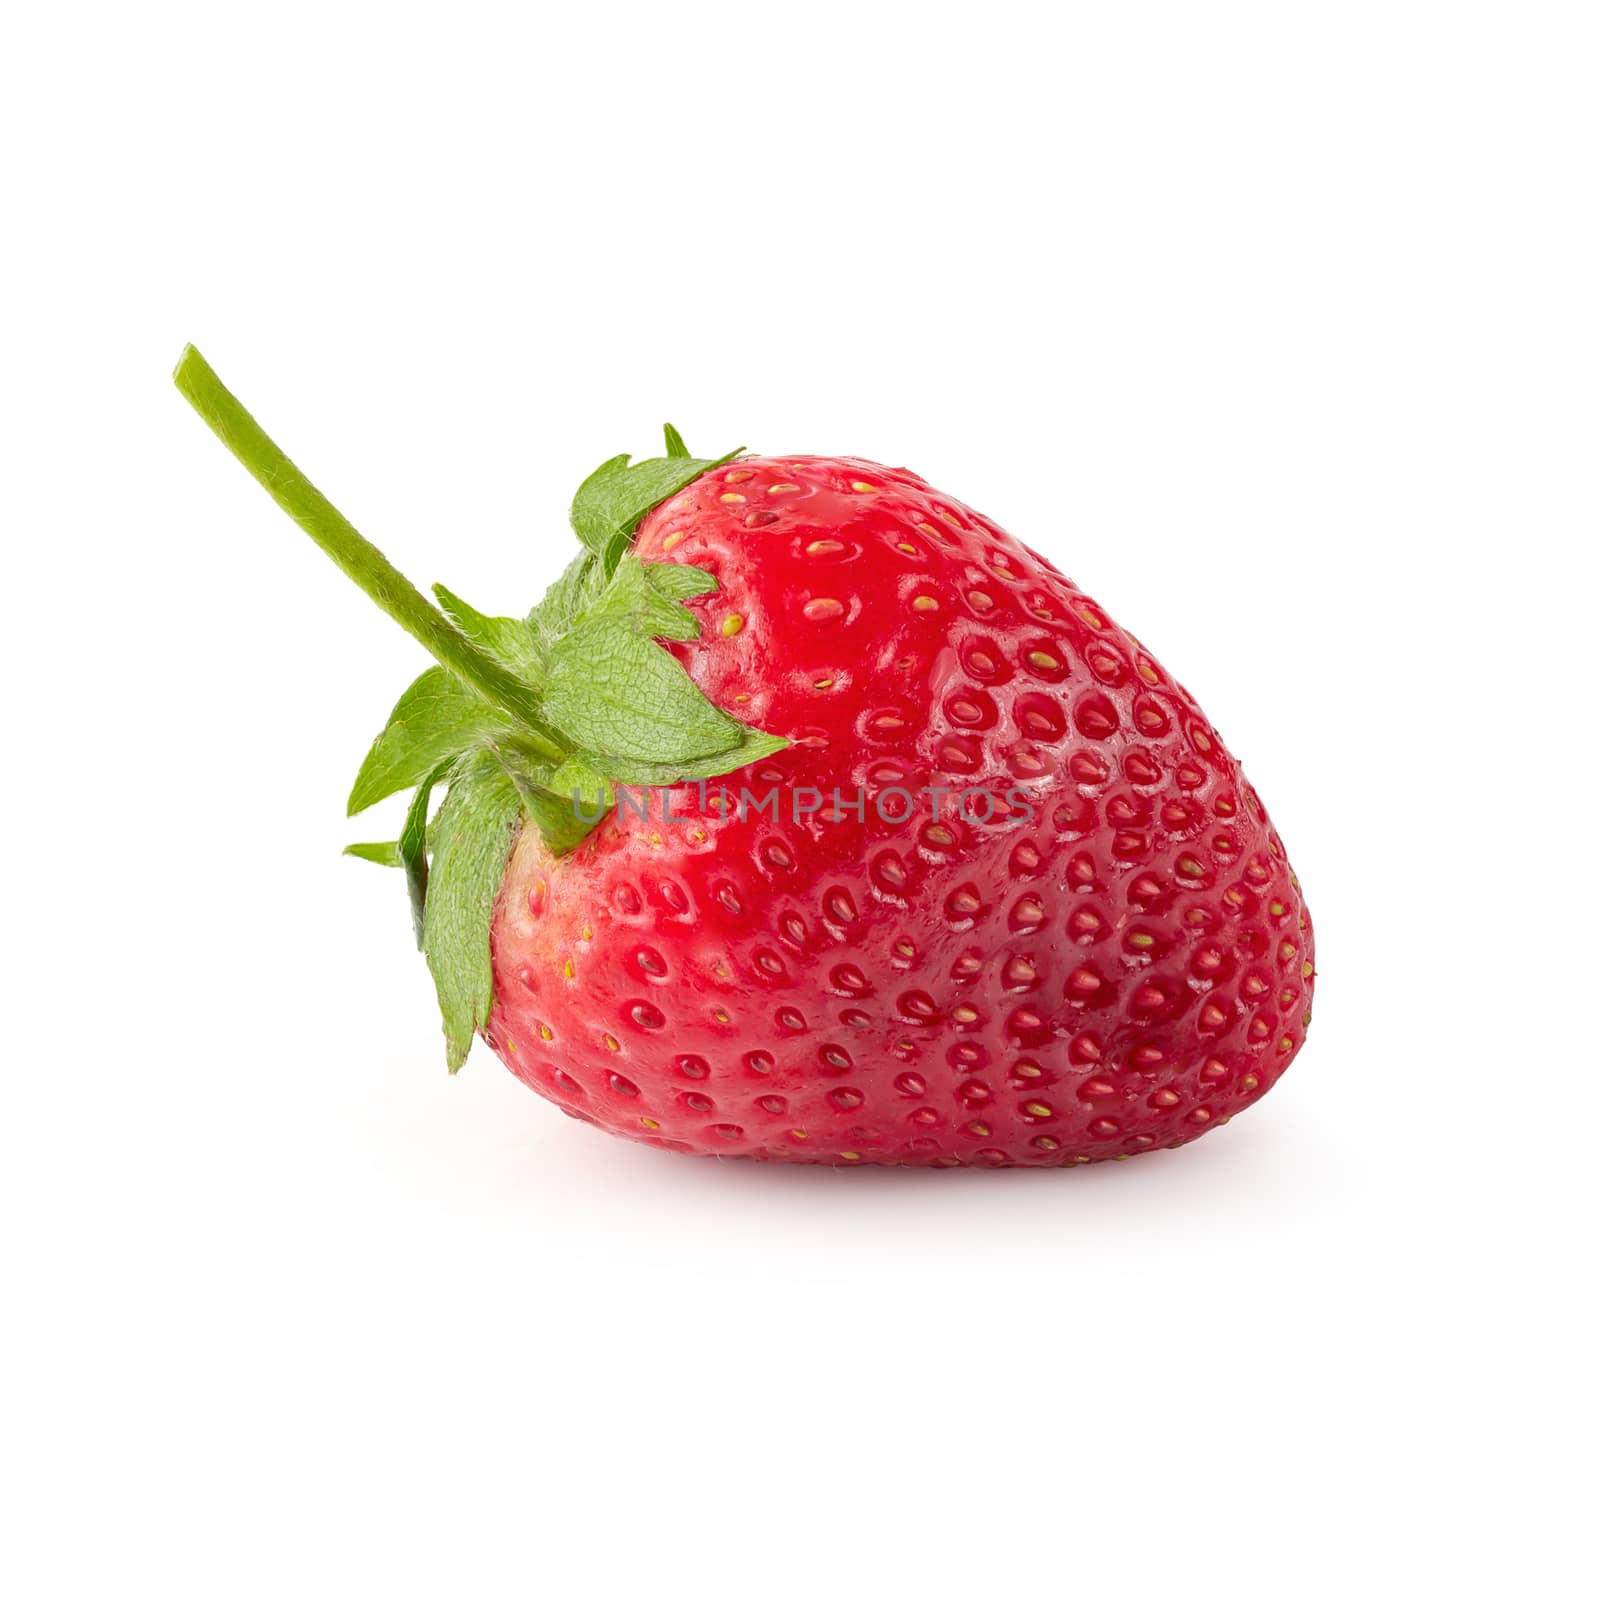 Fresh strawberries isolated over a white background by kaiskynet